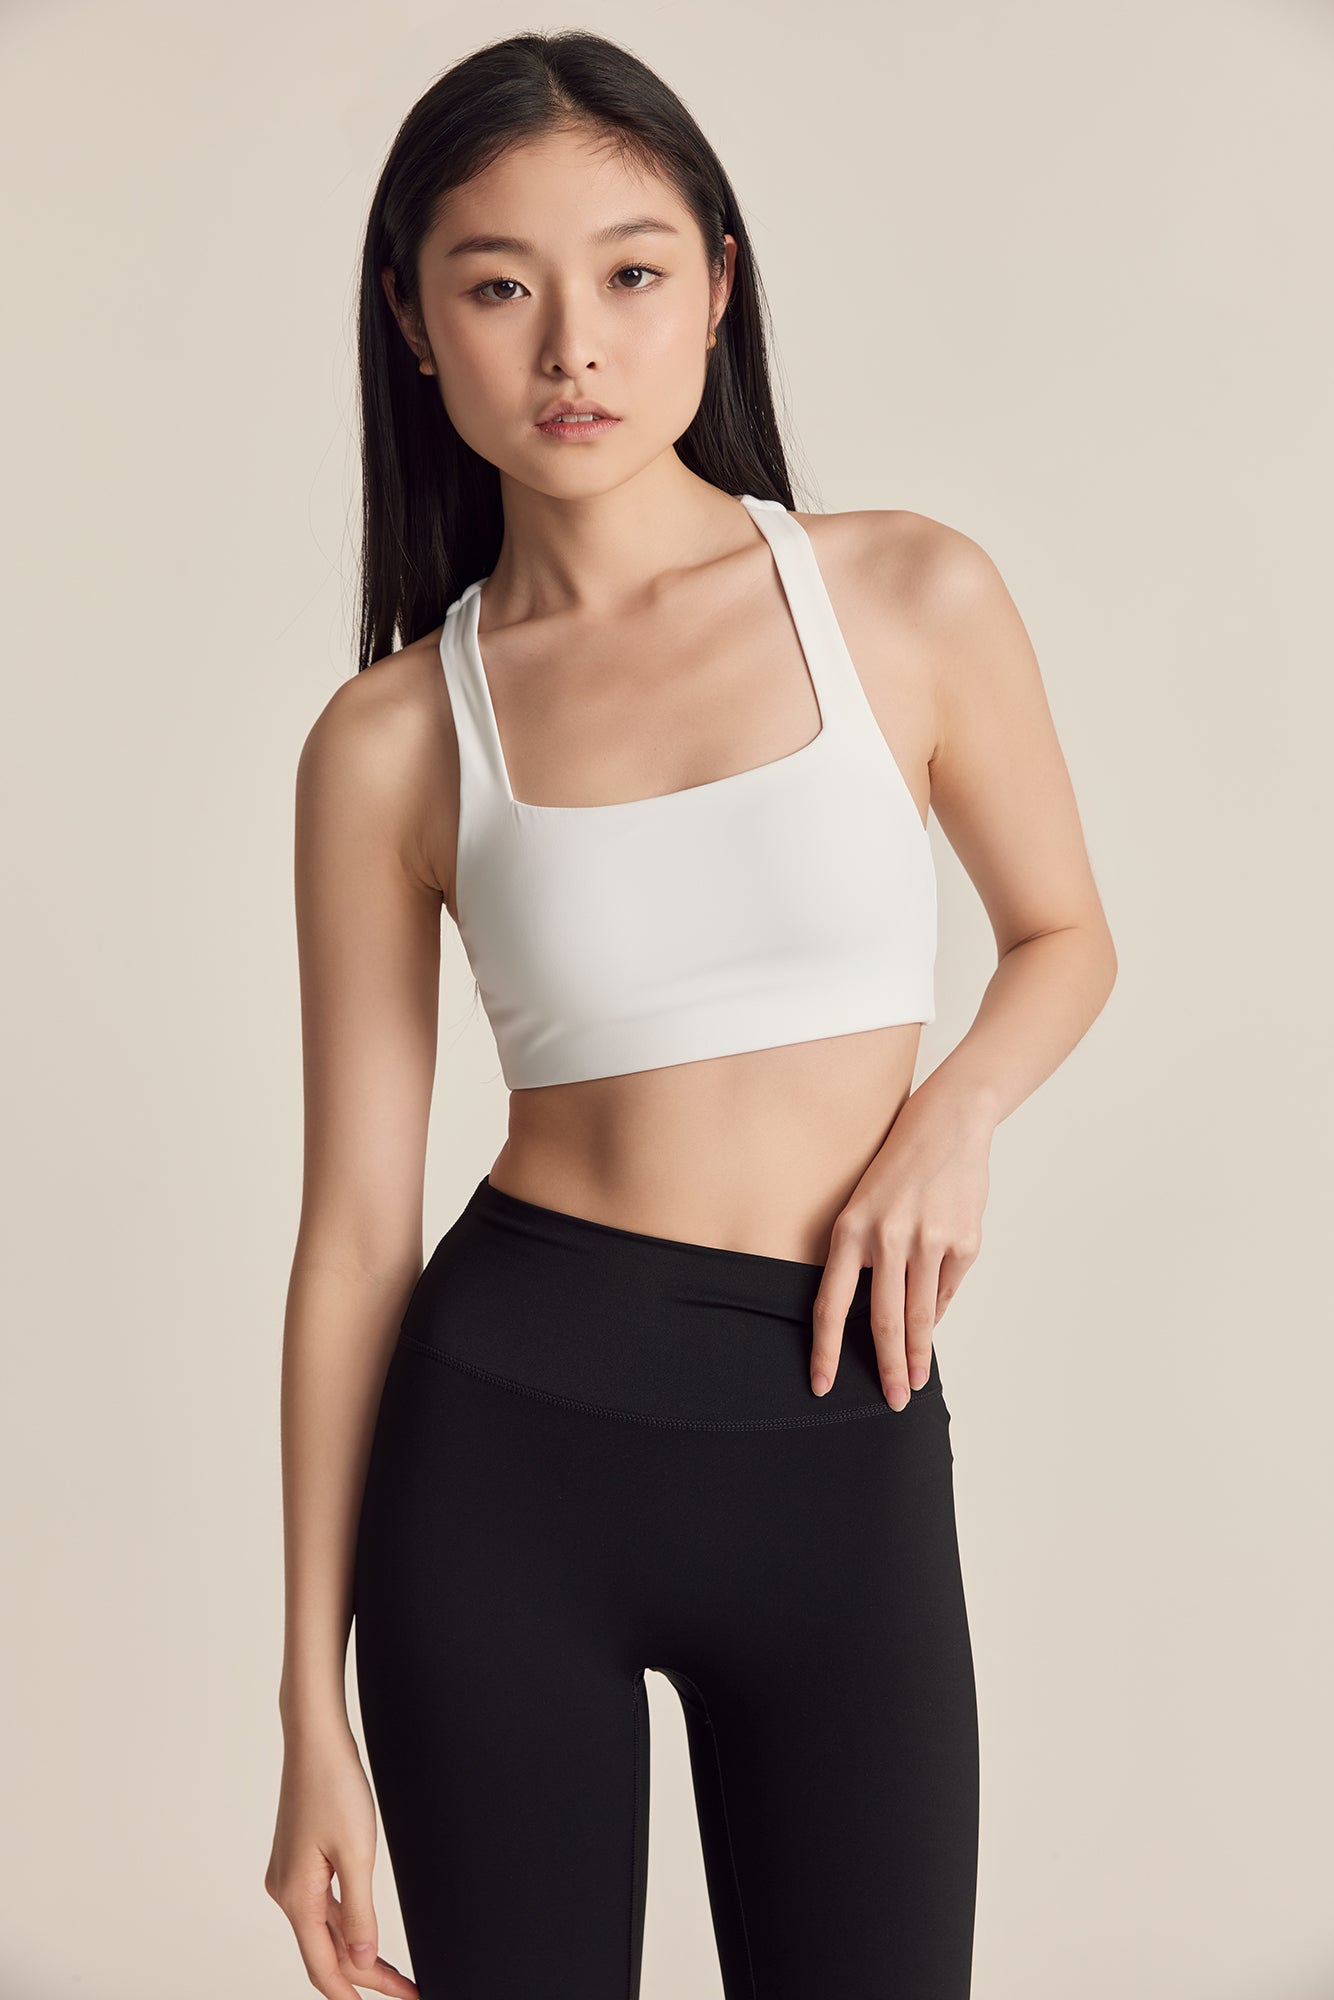 Buy 2020 New Instagram Hot Yoga Set Fitness Wear Yoga Pants Athletic  Apparel from Guangzhou Huayan Electronics Technology Co., Ltd., China